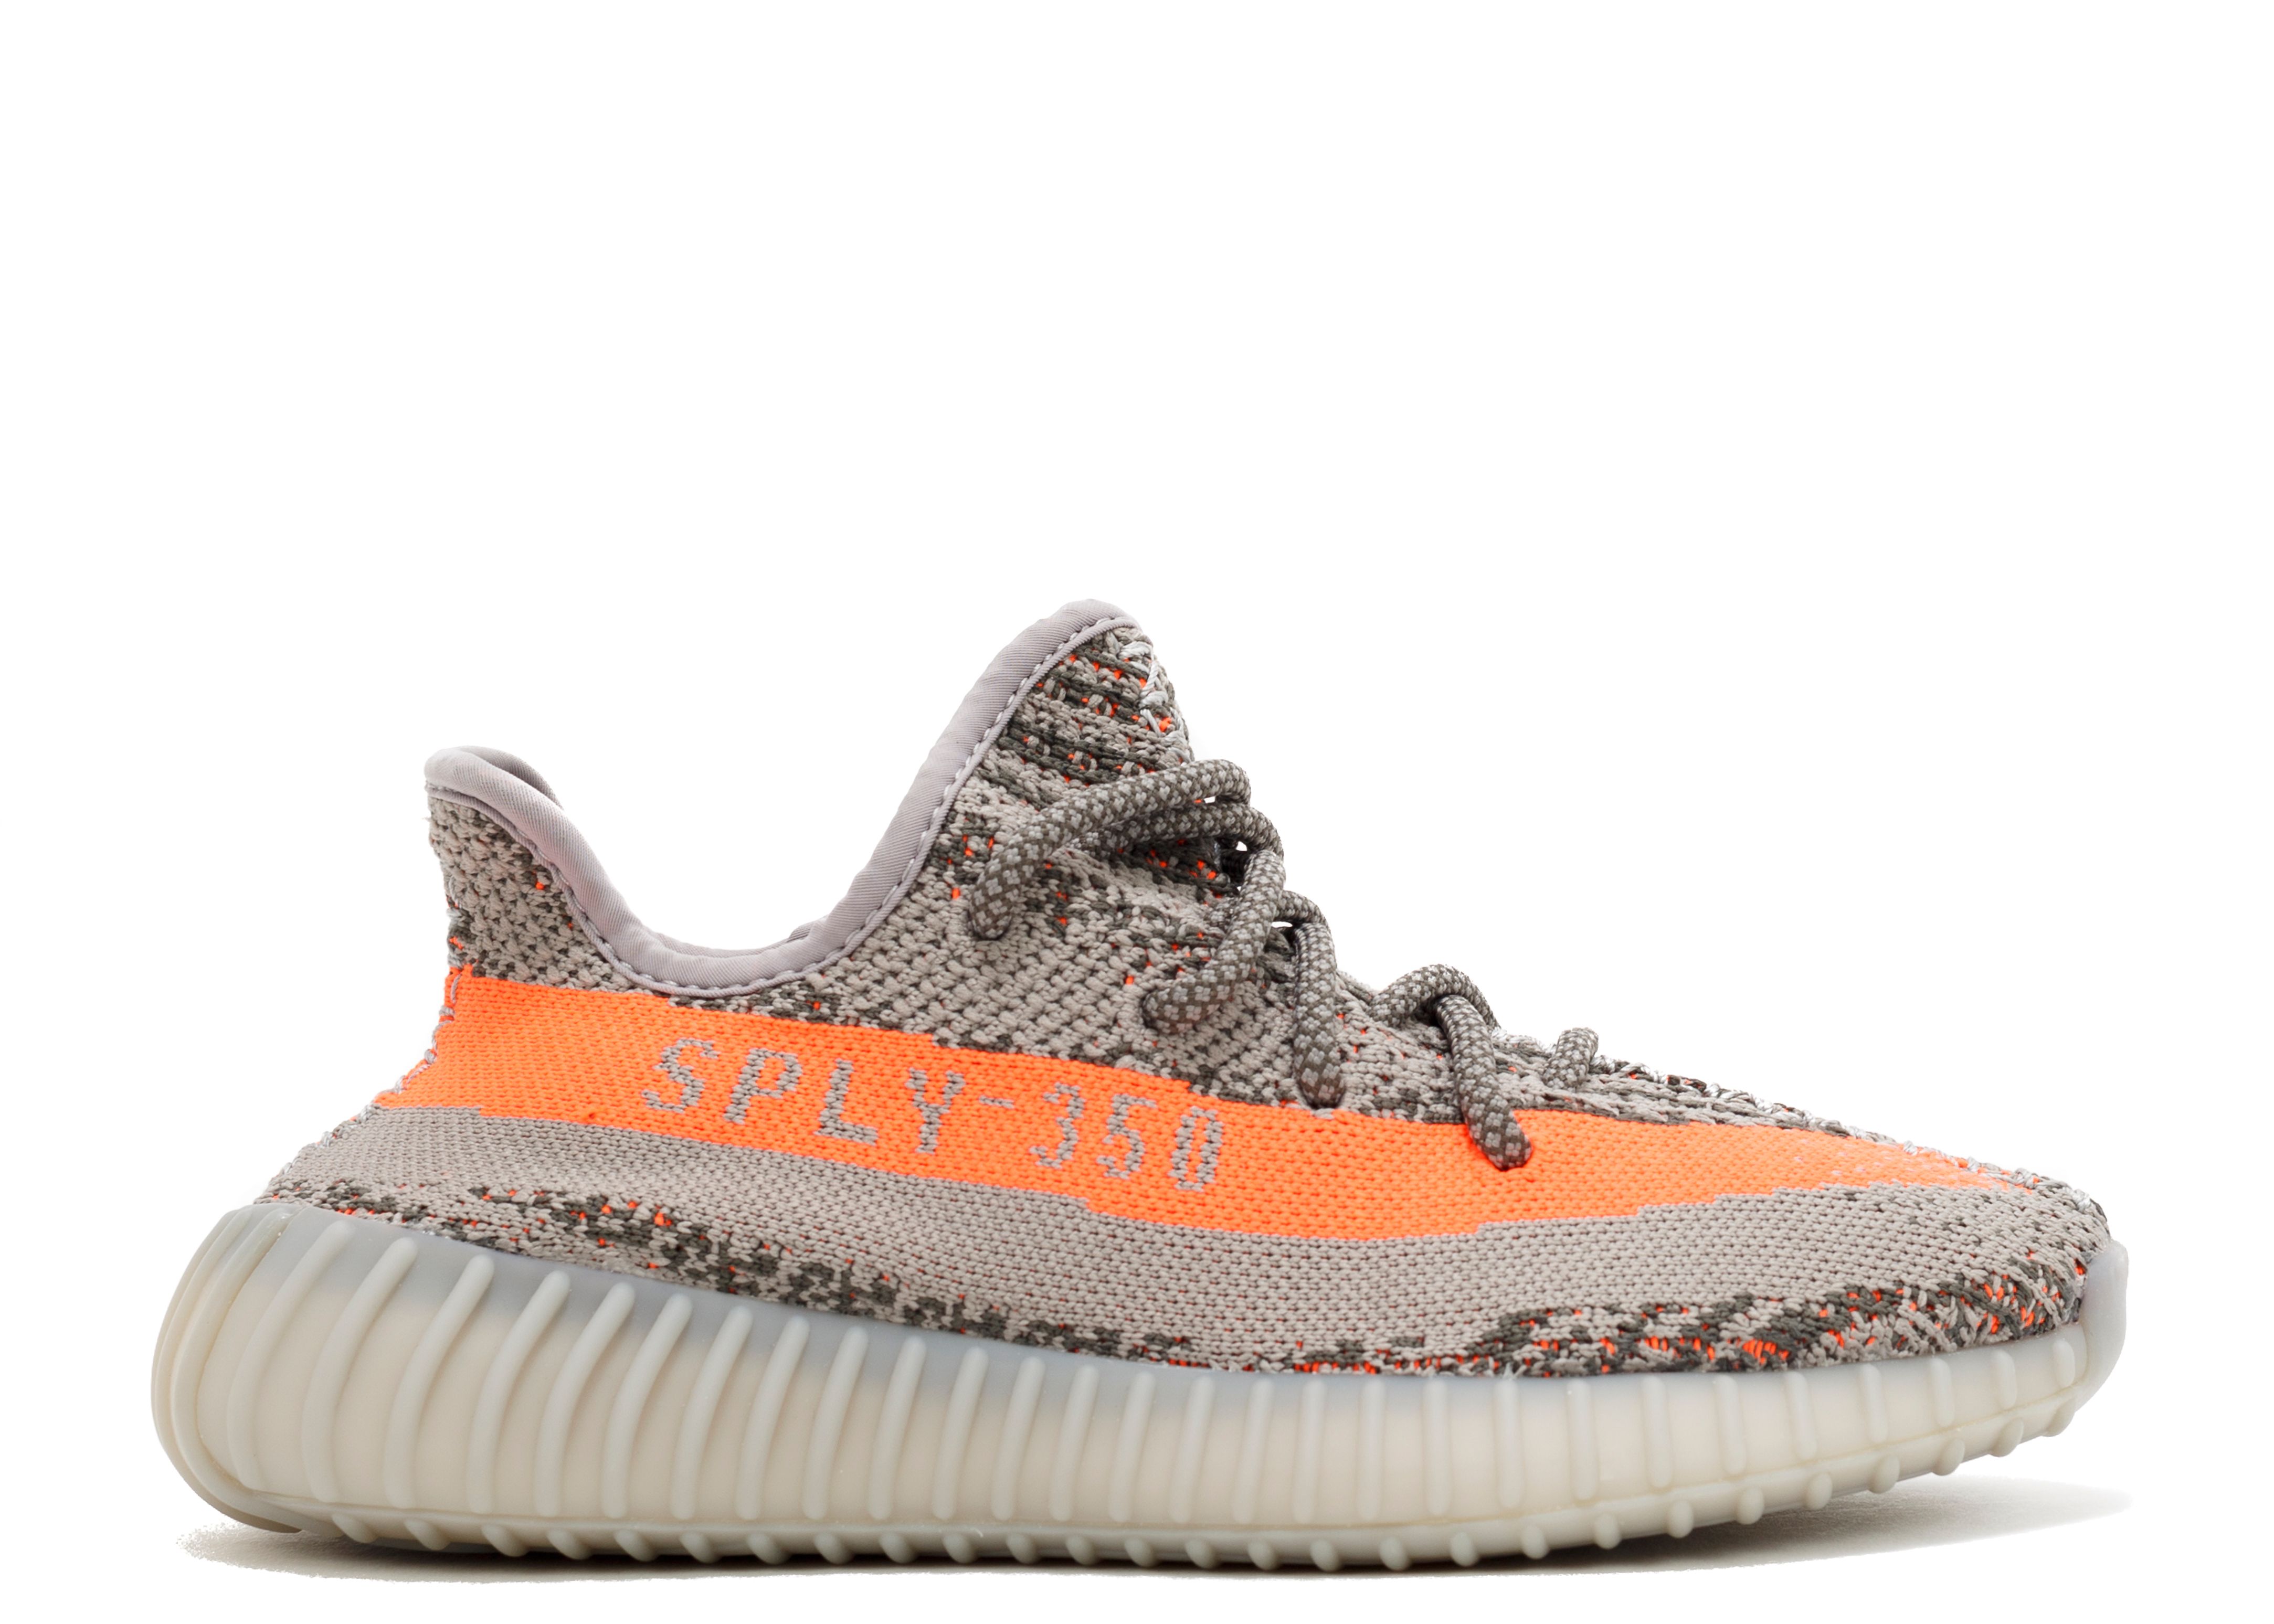 Free Shipping Adidas yeezy boost sply 350 v2 stripe solar red core 